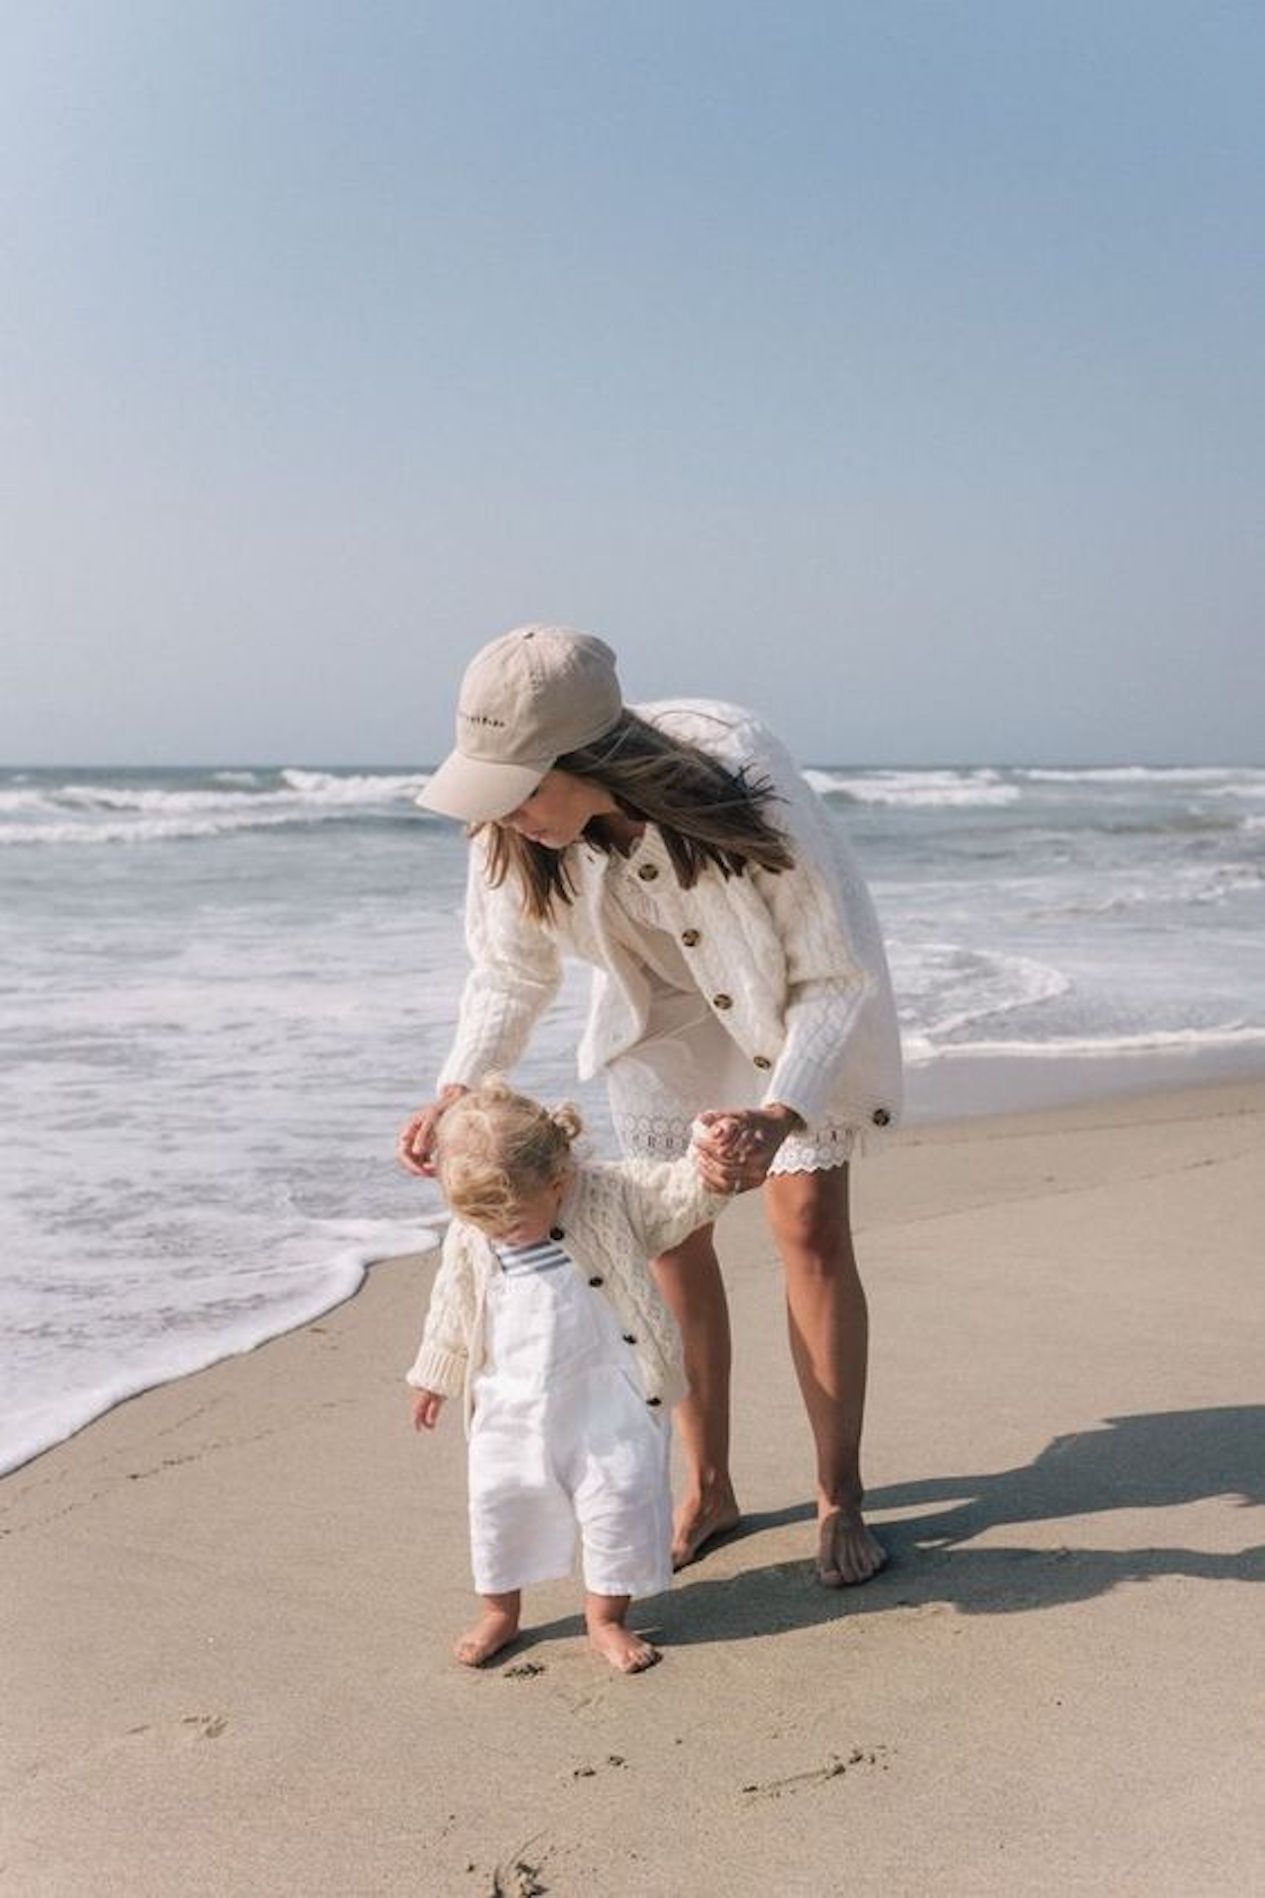 image of a mother and daughter at the beach with the ocean in the background wearing white clothing with ivory knit sweaters